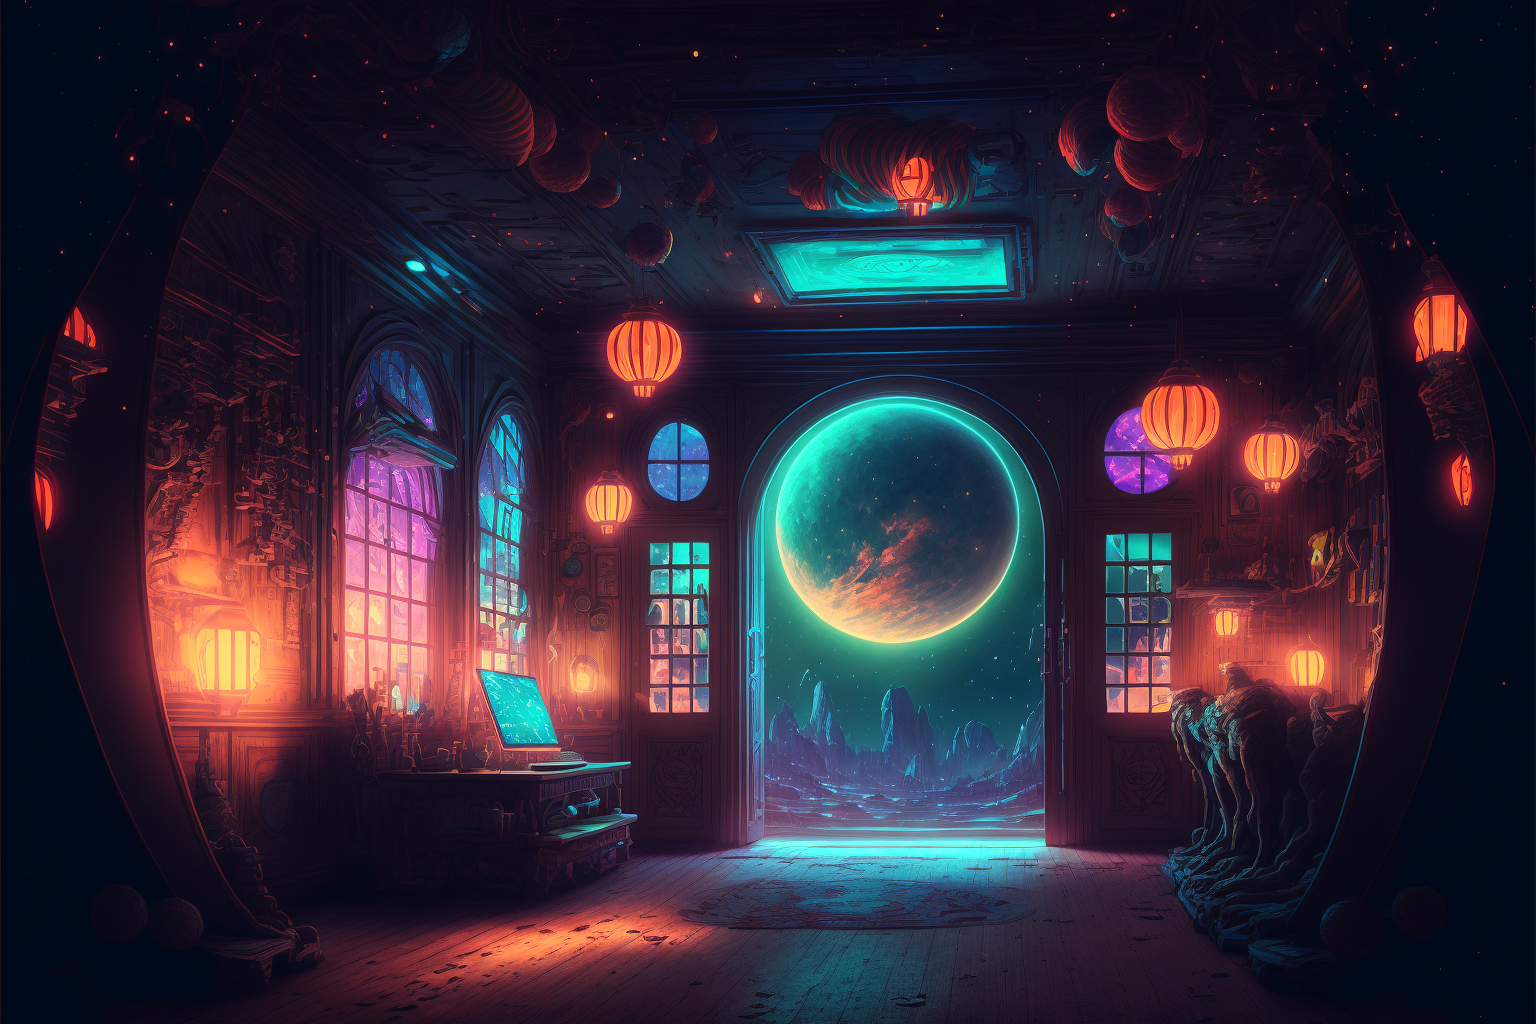 MadDoginSF_inside_a_massive_western_saloon_in_outer_space_lante_f7ac1727-5f3a-447d-9129-71d805fecb7c.png